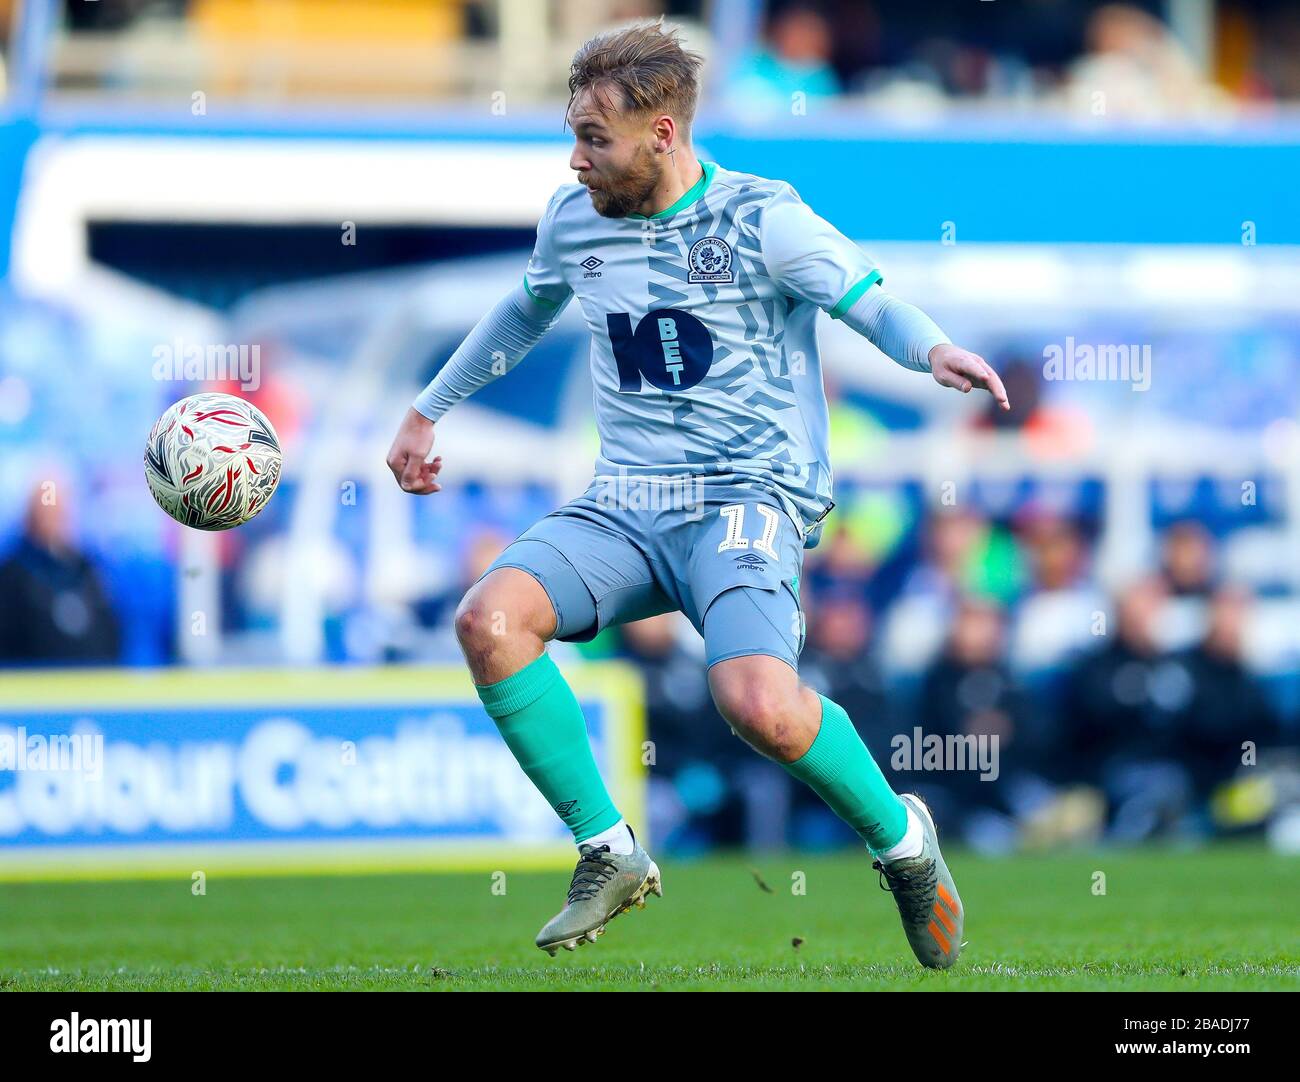 Blackburn Rovers' Harry Chapman during the FA Cup Third Round match at St Andrew's Trillion Trophy Stadium Stock Photo